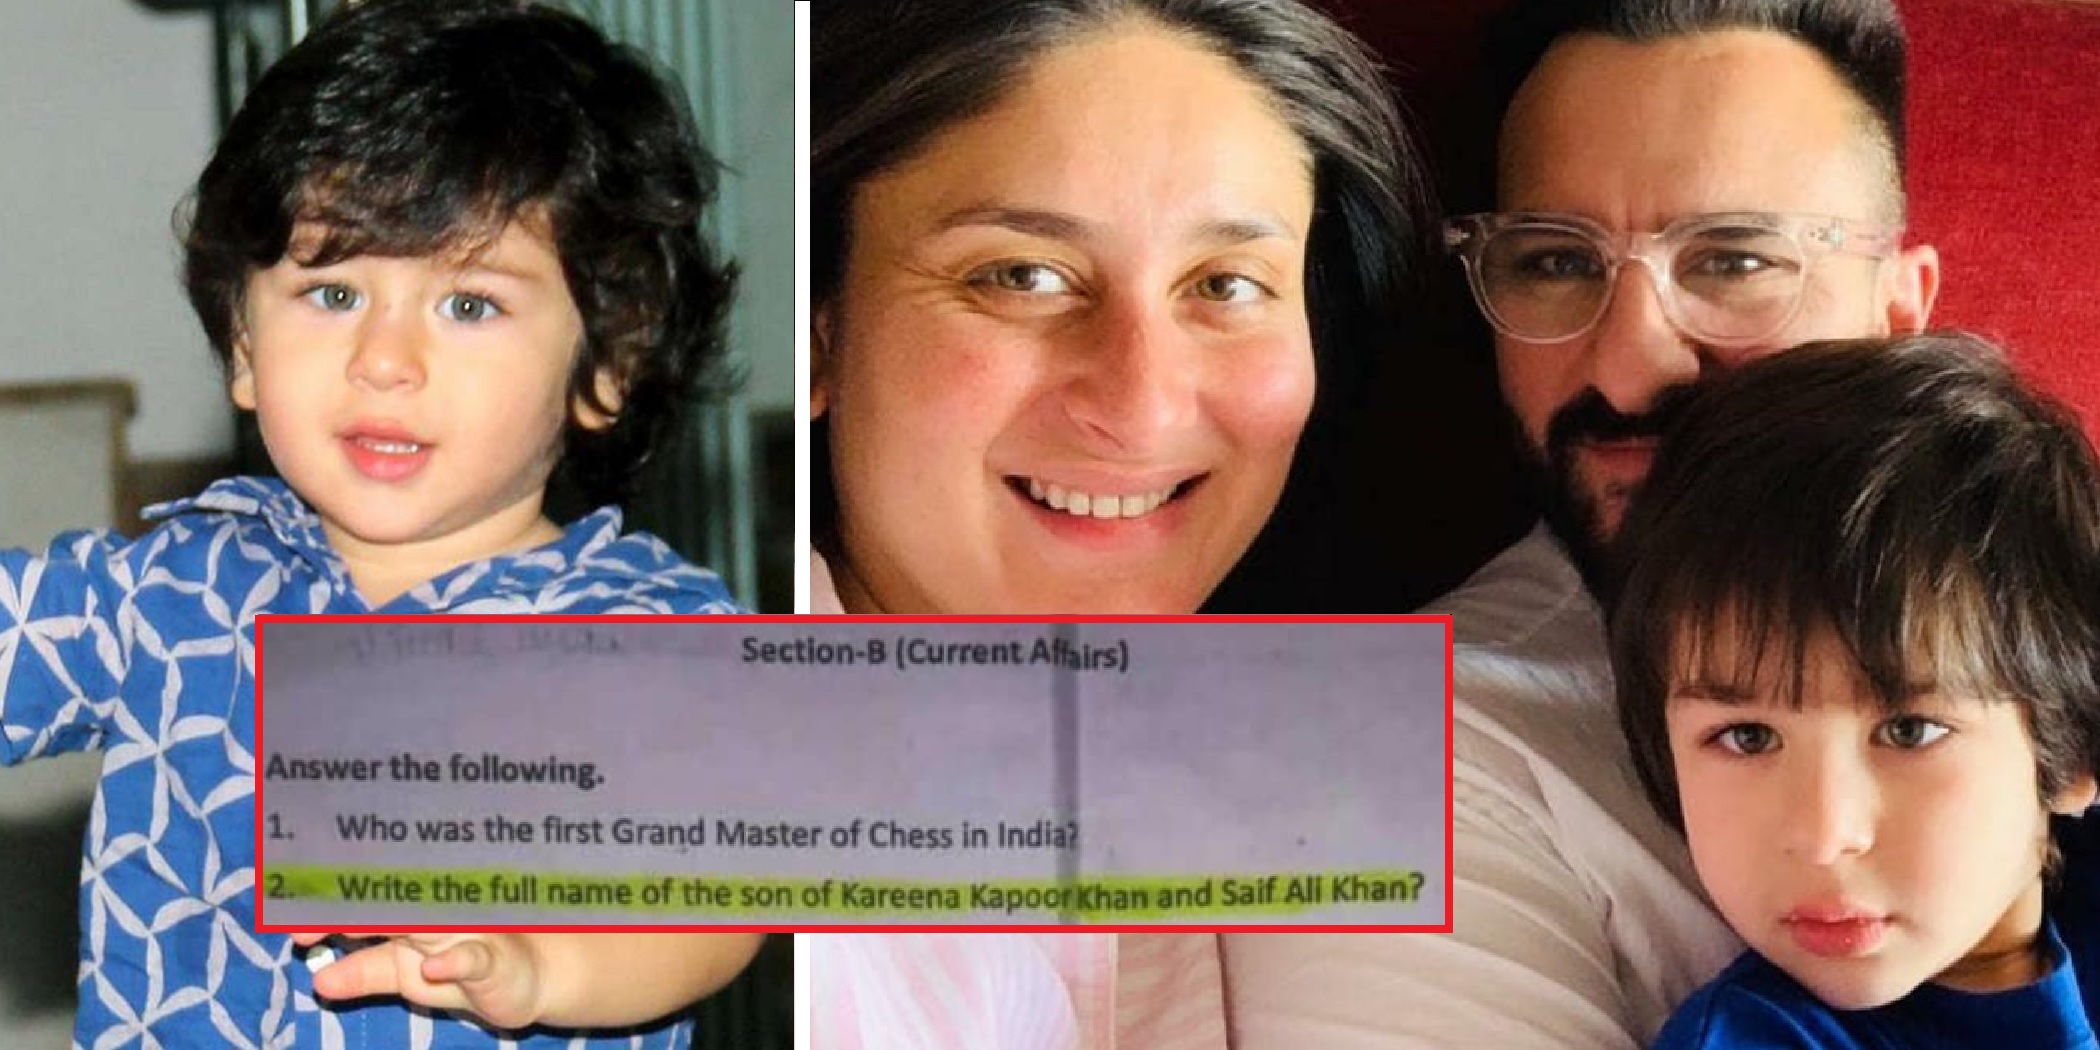 ‘What Is The Name Of Saif & Kareena’s Son?’ – MP School Asks Students In Exam! Parents File Complaint